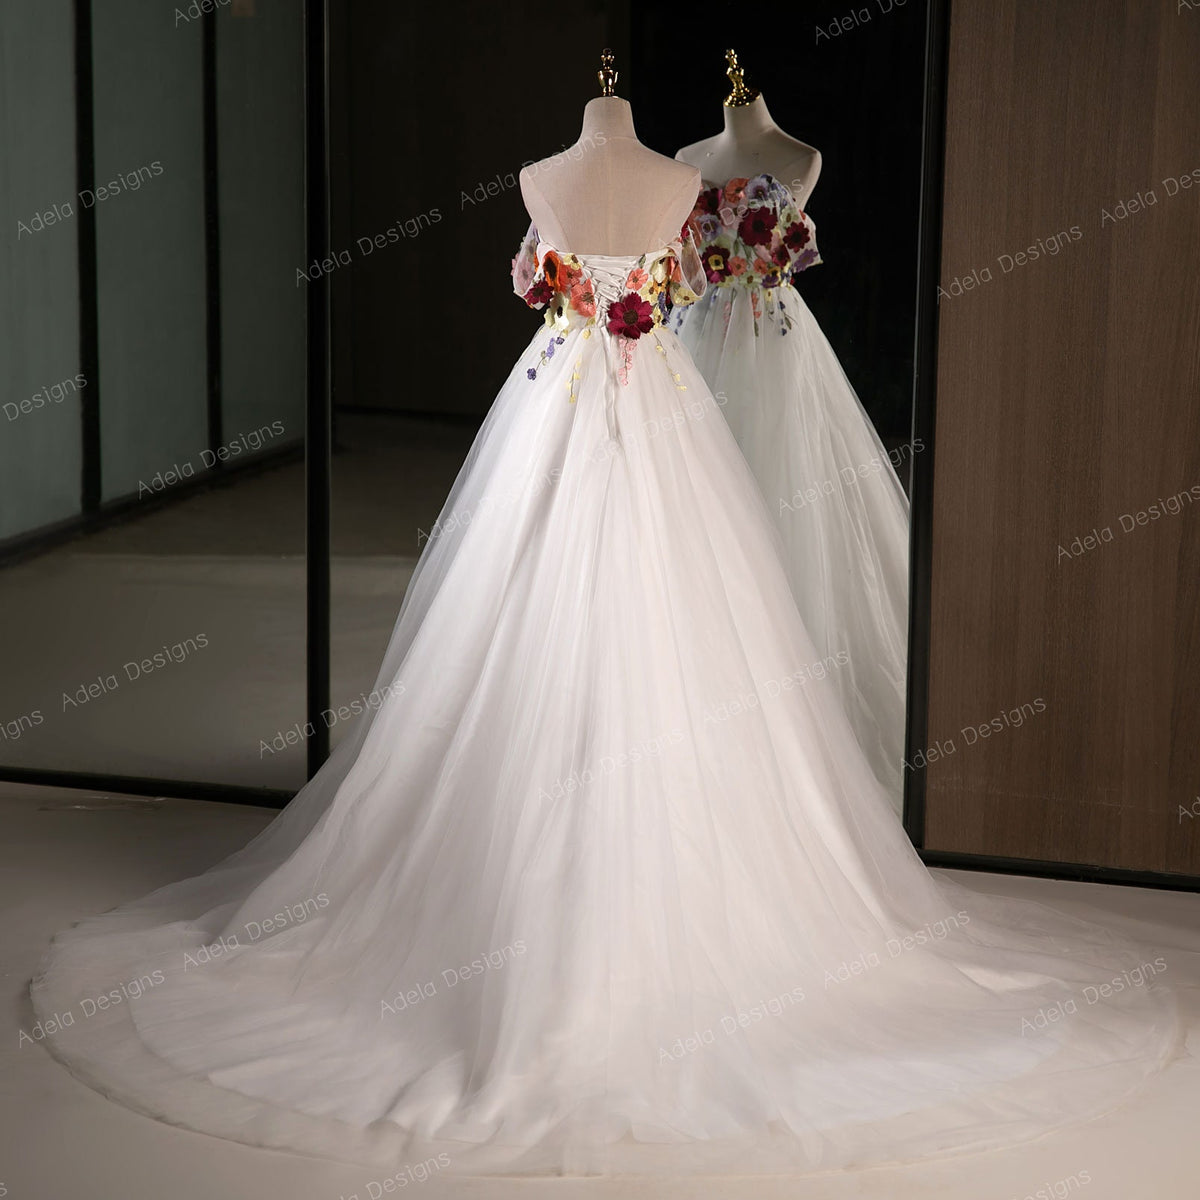 3D Floral Lace Ball Gown Wedding Dress Bridal Detachable Off The Shoulder Straps Lace Open Back Sleeveless Strapless Corset Back Colorful